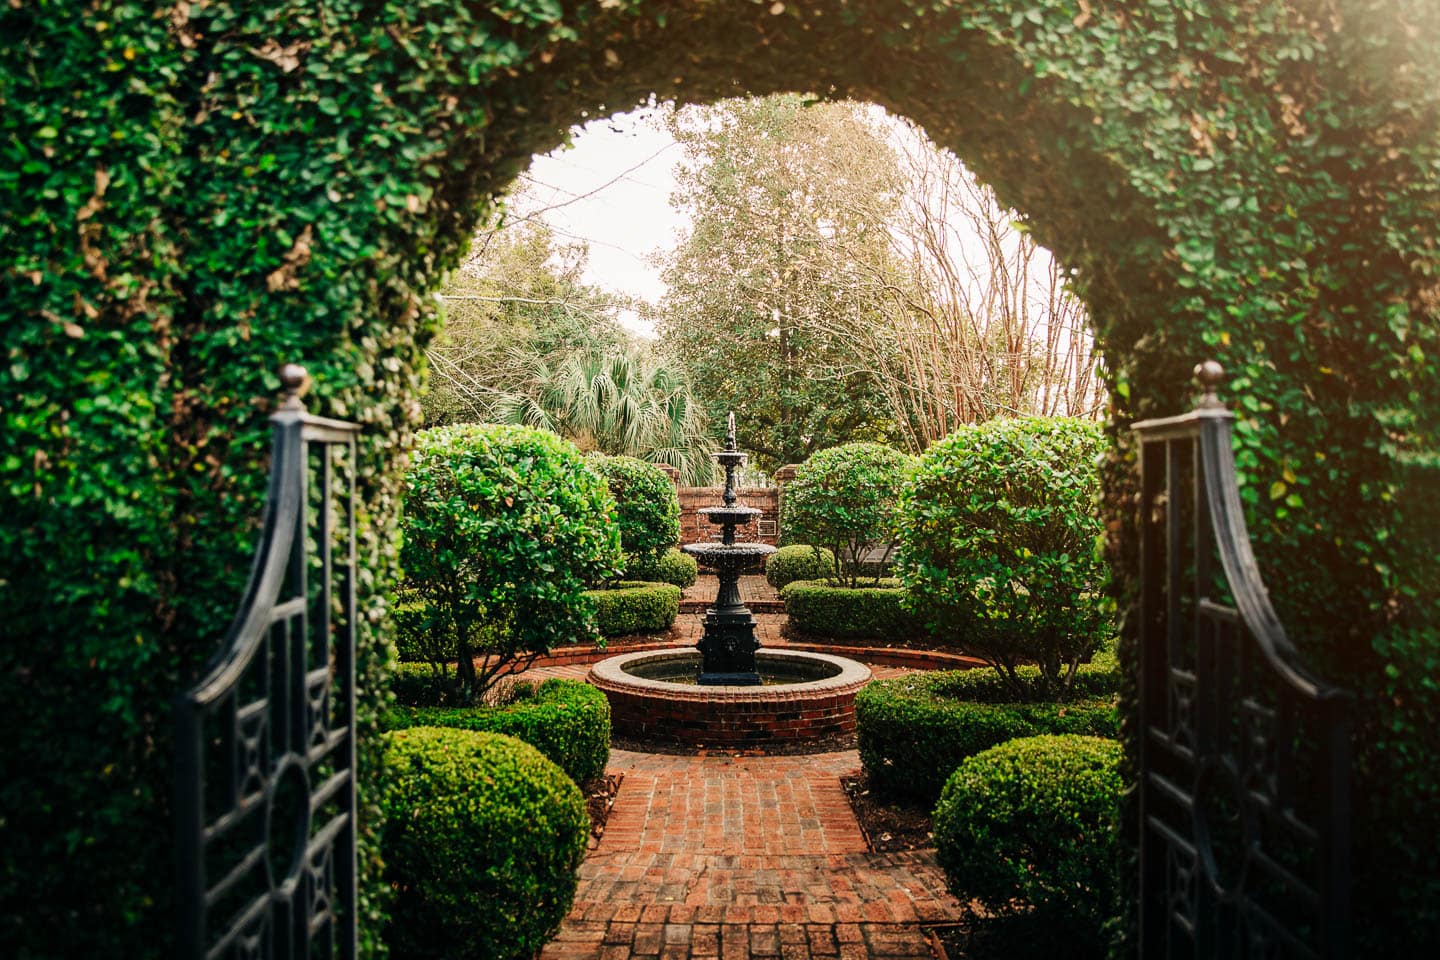 A formal garden with clipped trees and hedges and a fountain in the middle viewed through a hedge arch